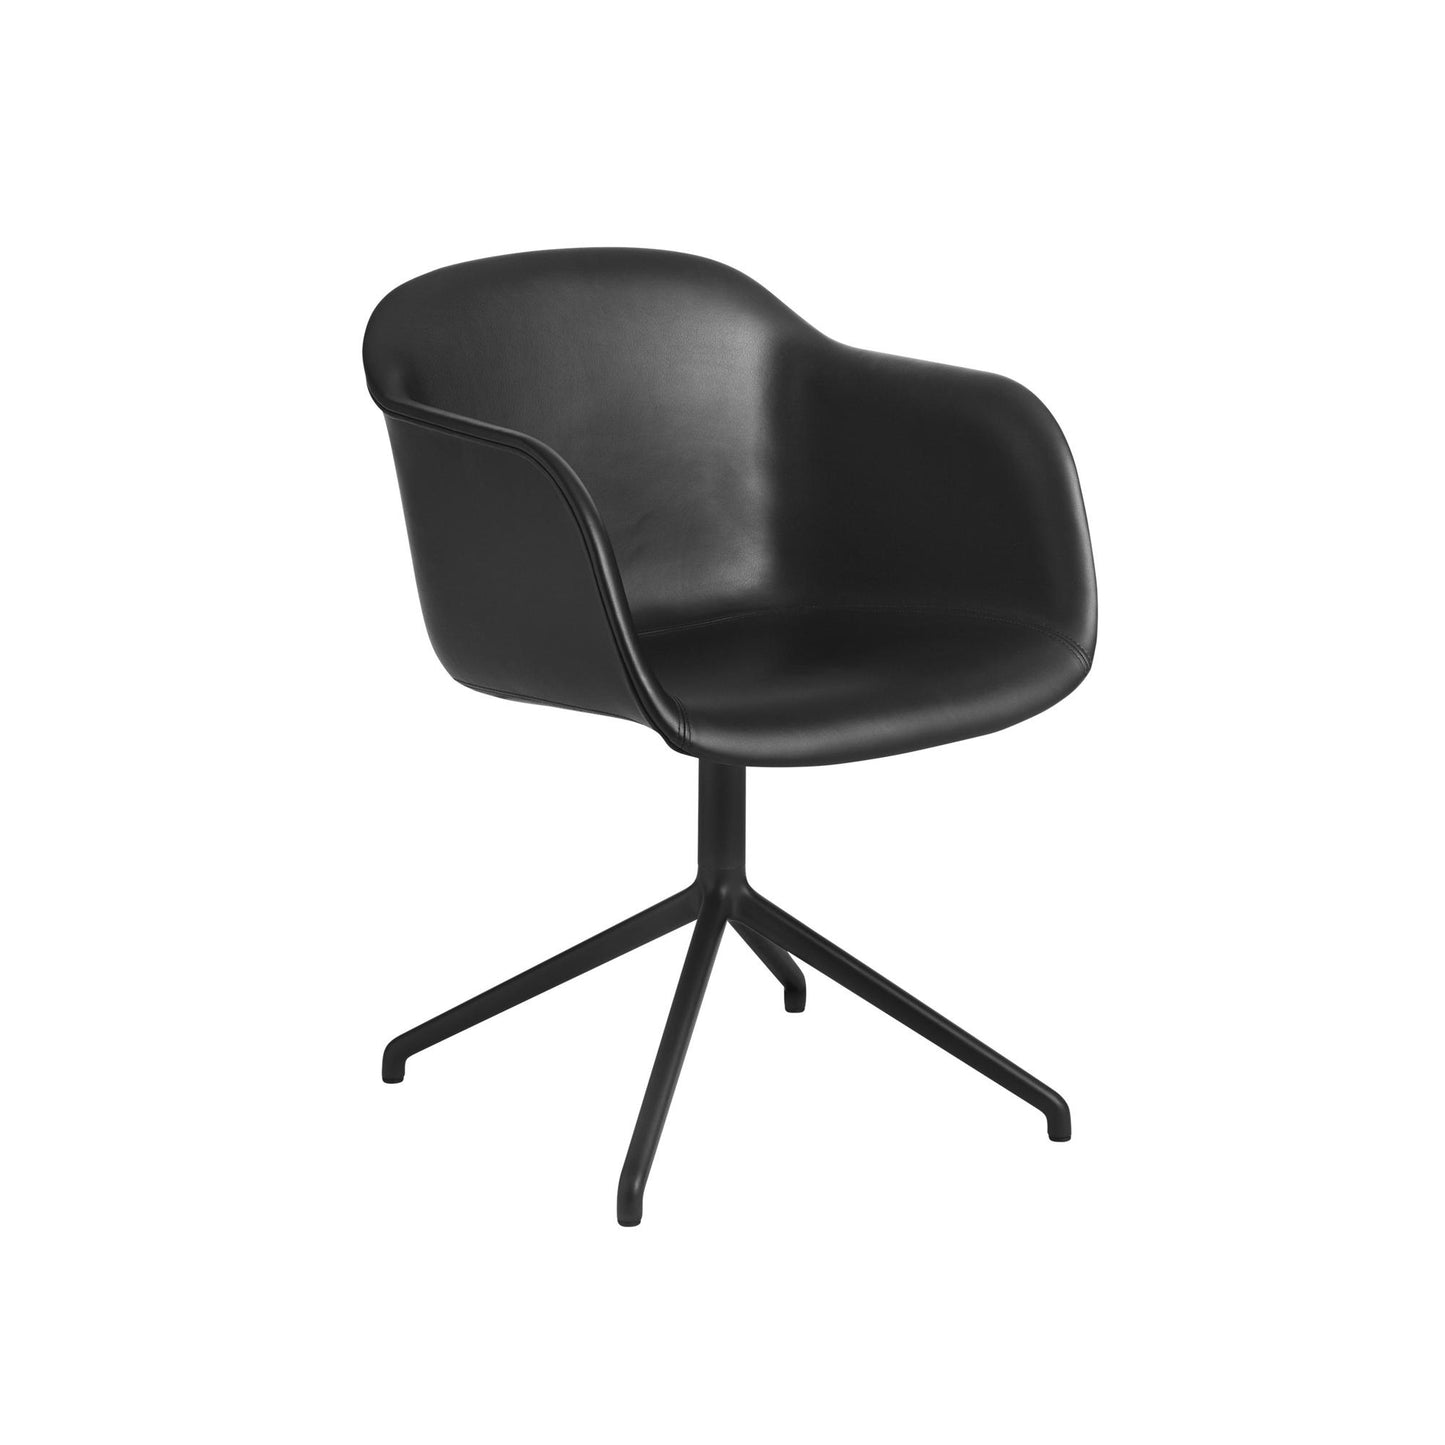 Fiber Dining Chair w. Armrests and Swivel Base by Muuto #Leather Upholstered Black/ Black